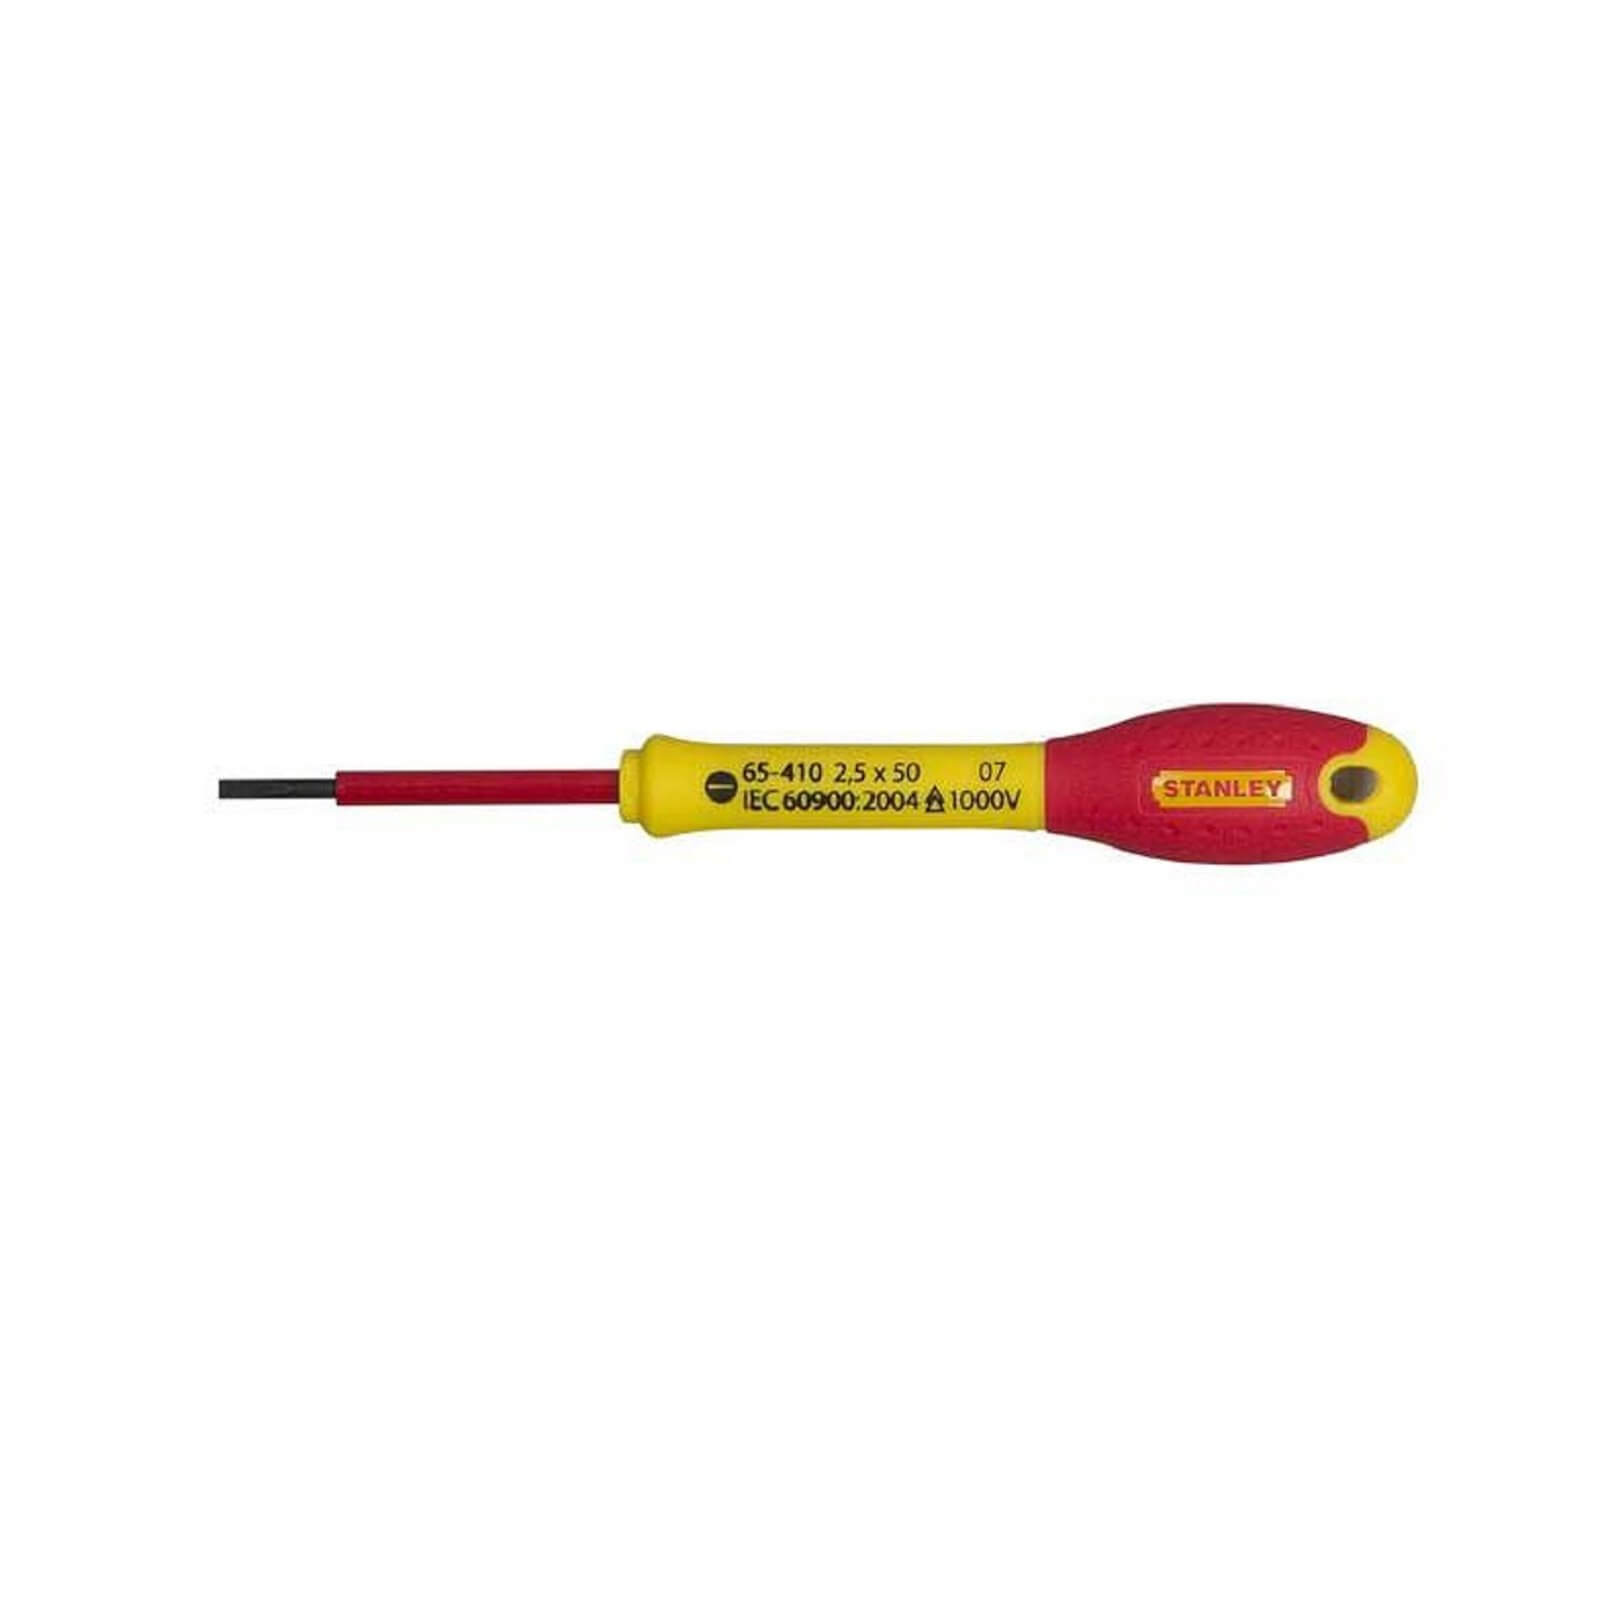 Stanley Fatmax Slotted Insulated Screwdriver - 2.5x50mm